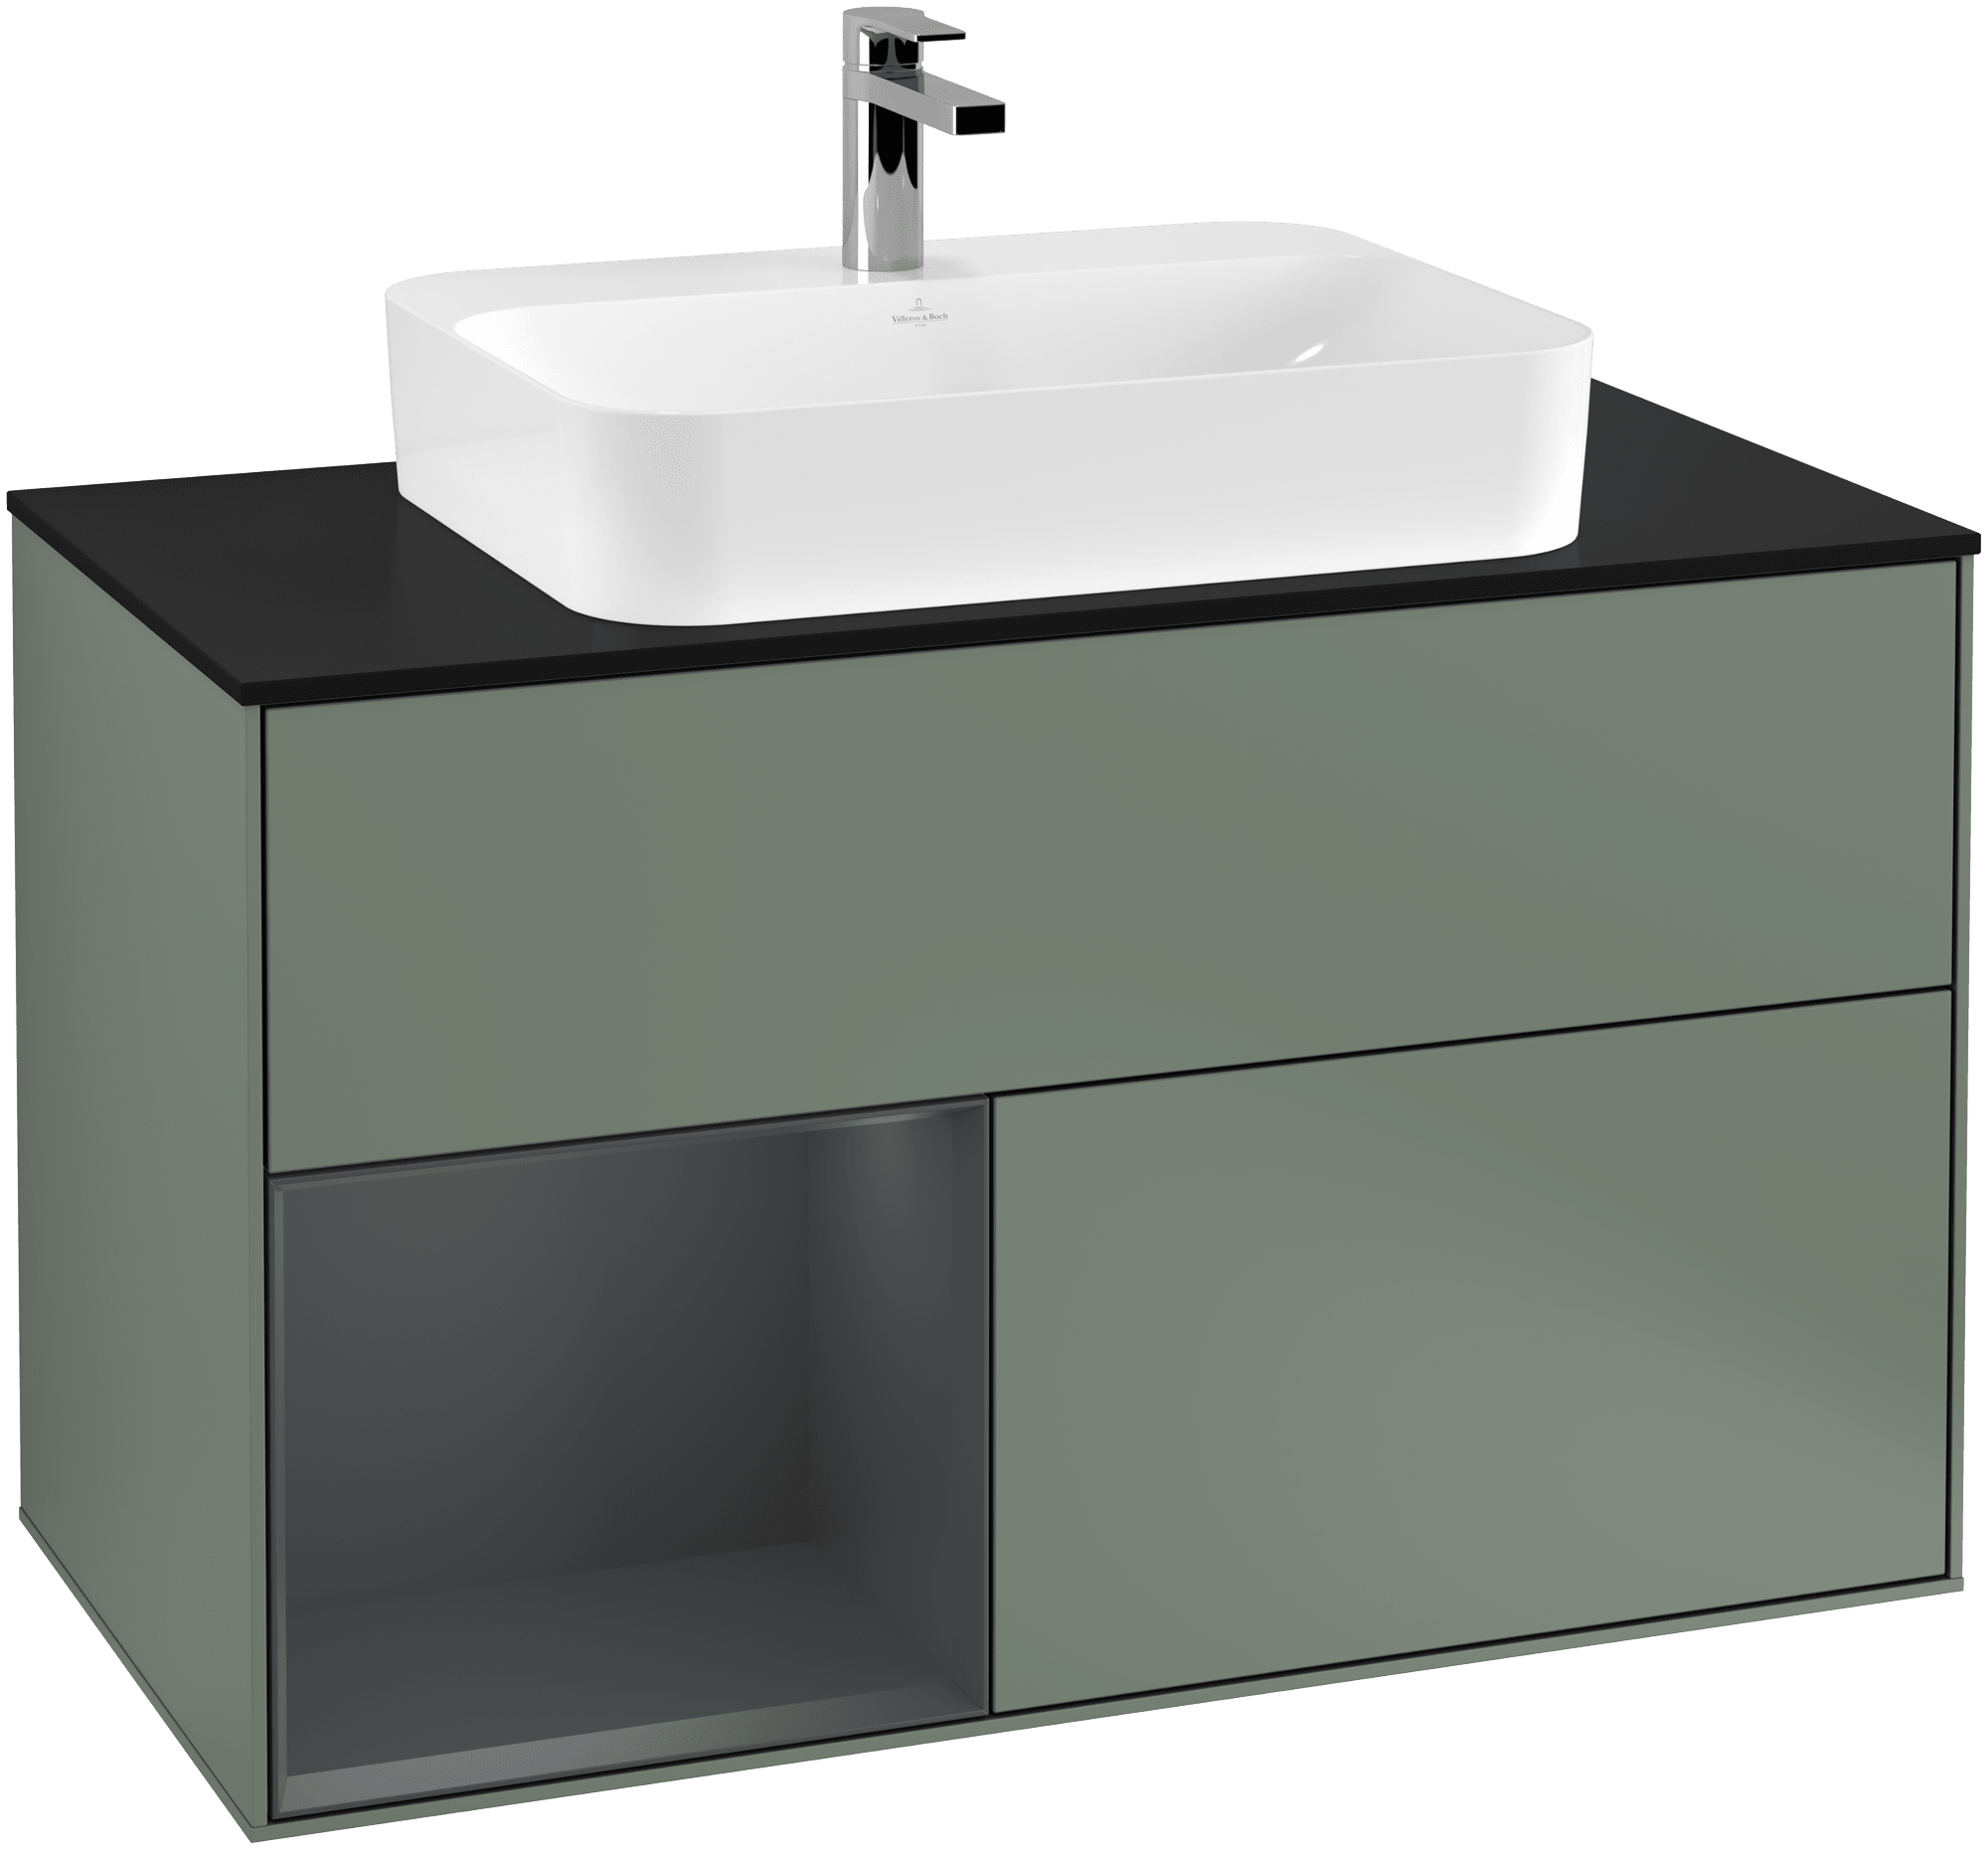 Picture of VILLEROY BOCH Finion Vanity unit, with lighting, 2 pull-out compartments, 1000 x 603 x 501 mm, Olive Matt Lacquer / Midnight Blue Matt Lacquer / Glass Black Matt #G362HGGM